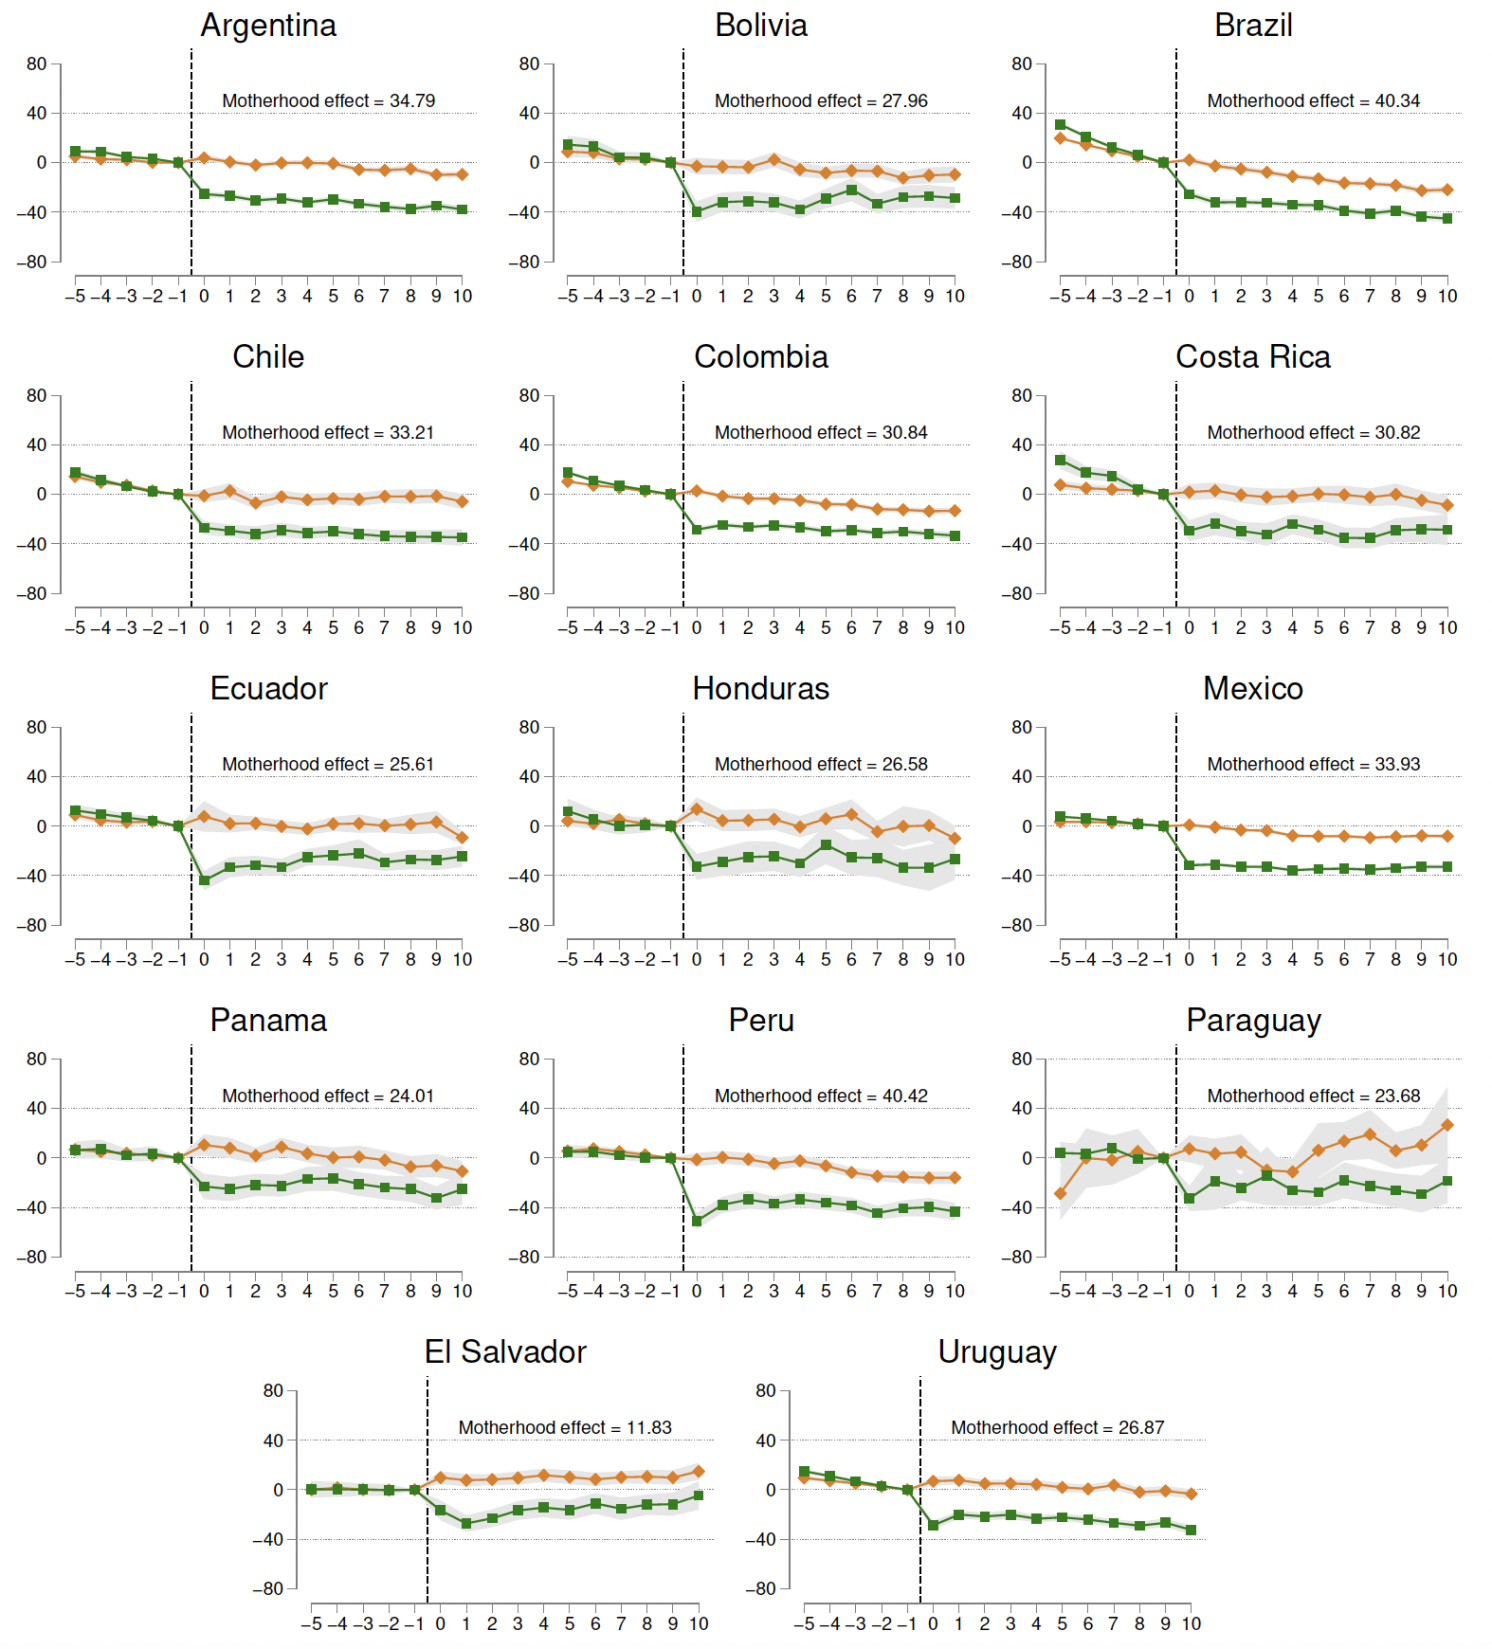 Figure 3 Parenthood effect on labour earnings across Latin American countries